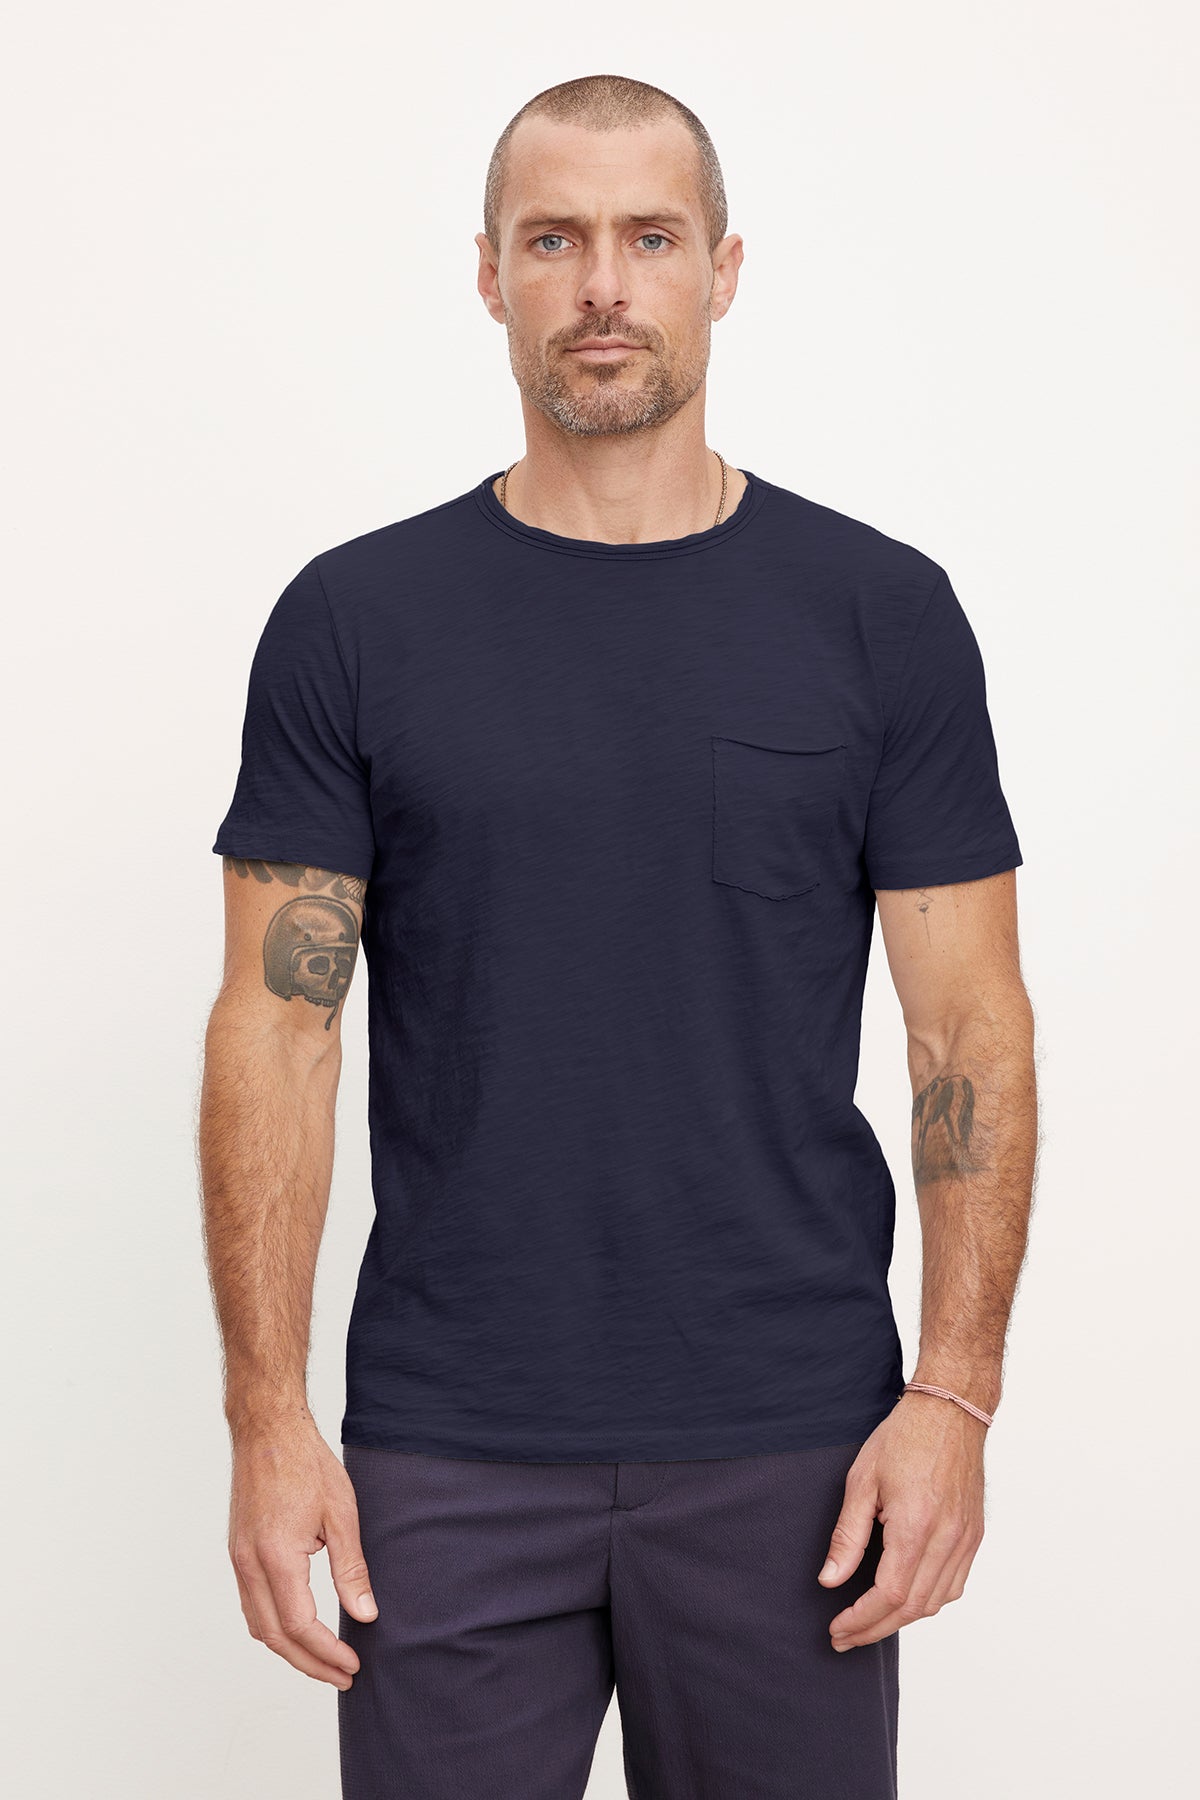   A man with short hair and tattoos on his arms, wearing a dark blue textured cotton slub CHAD TEE by Velvet by Graham & Spencer and navy blue pants, standing against a plain white background. 